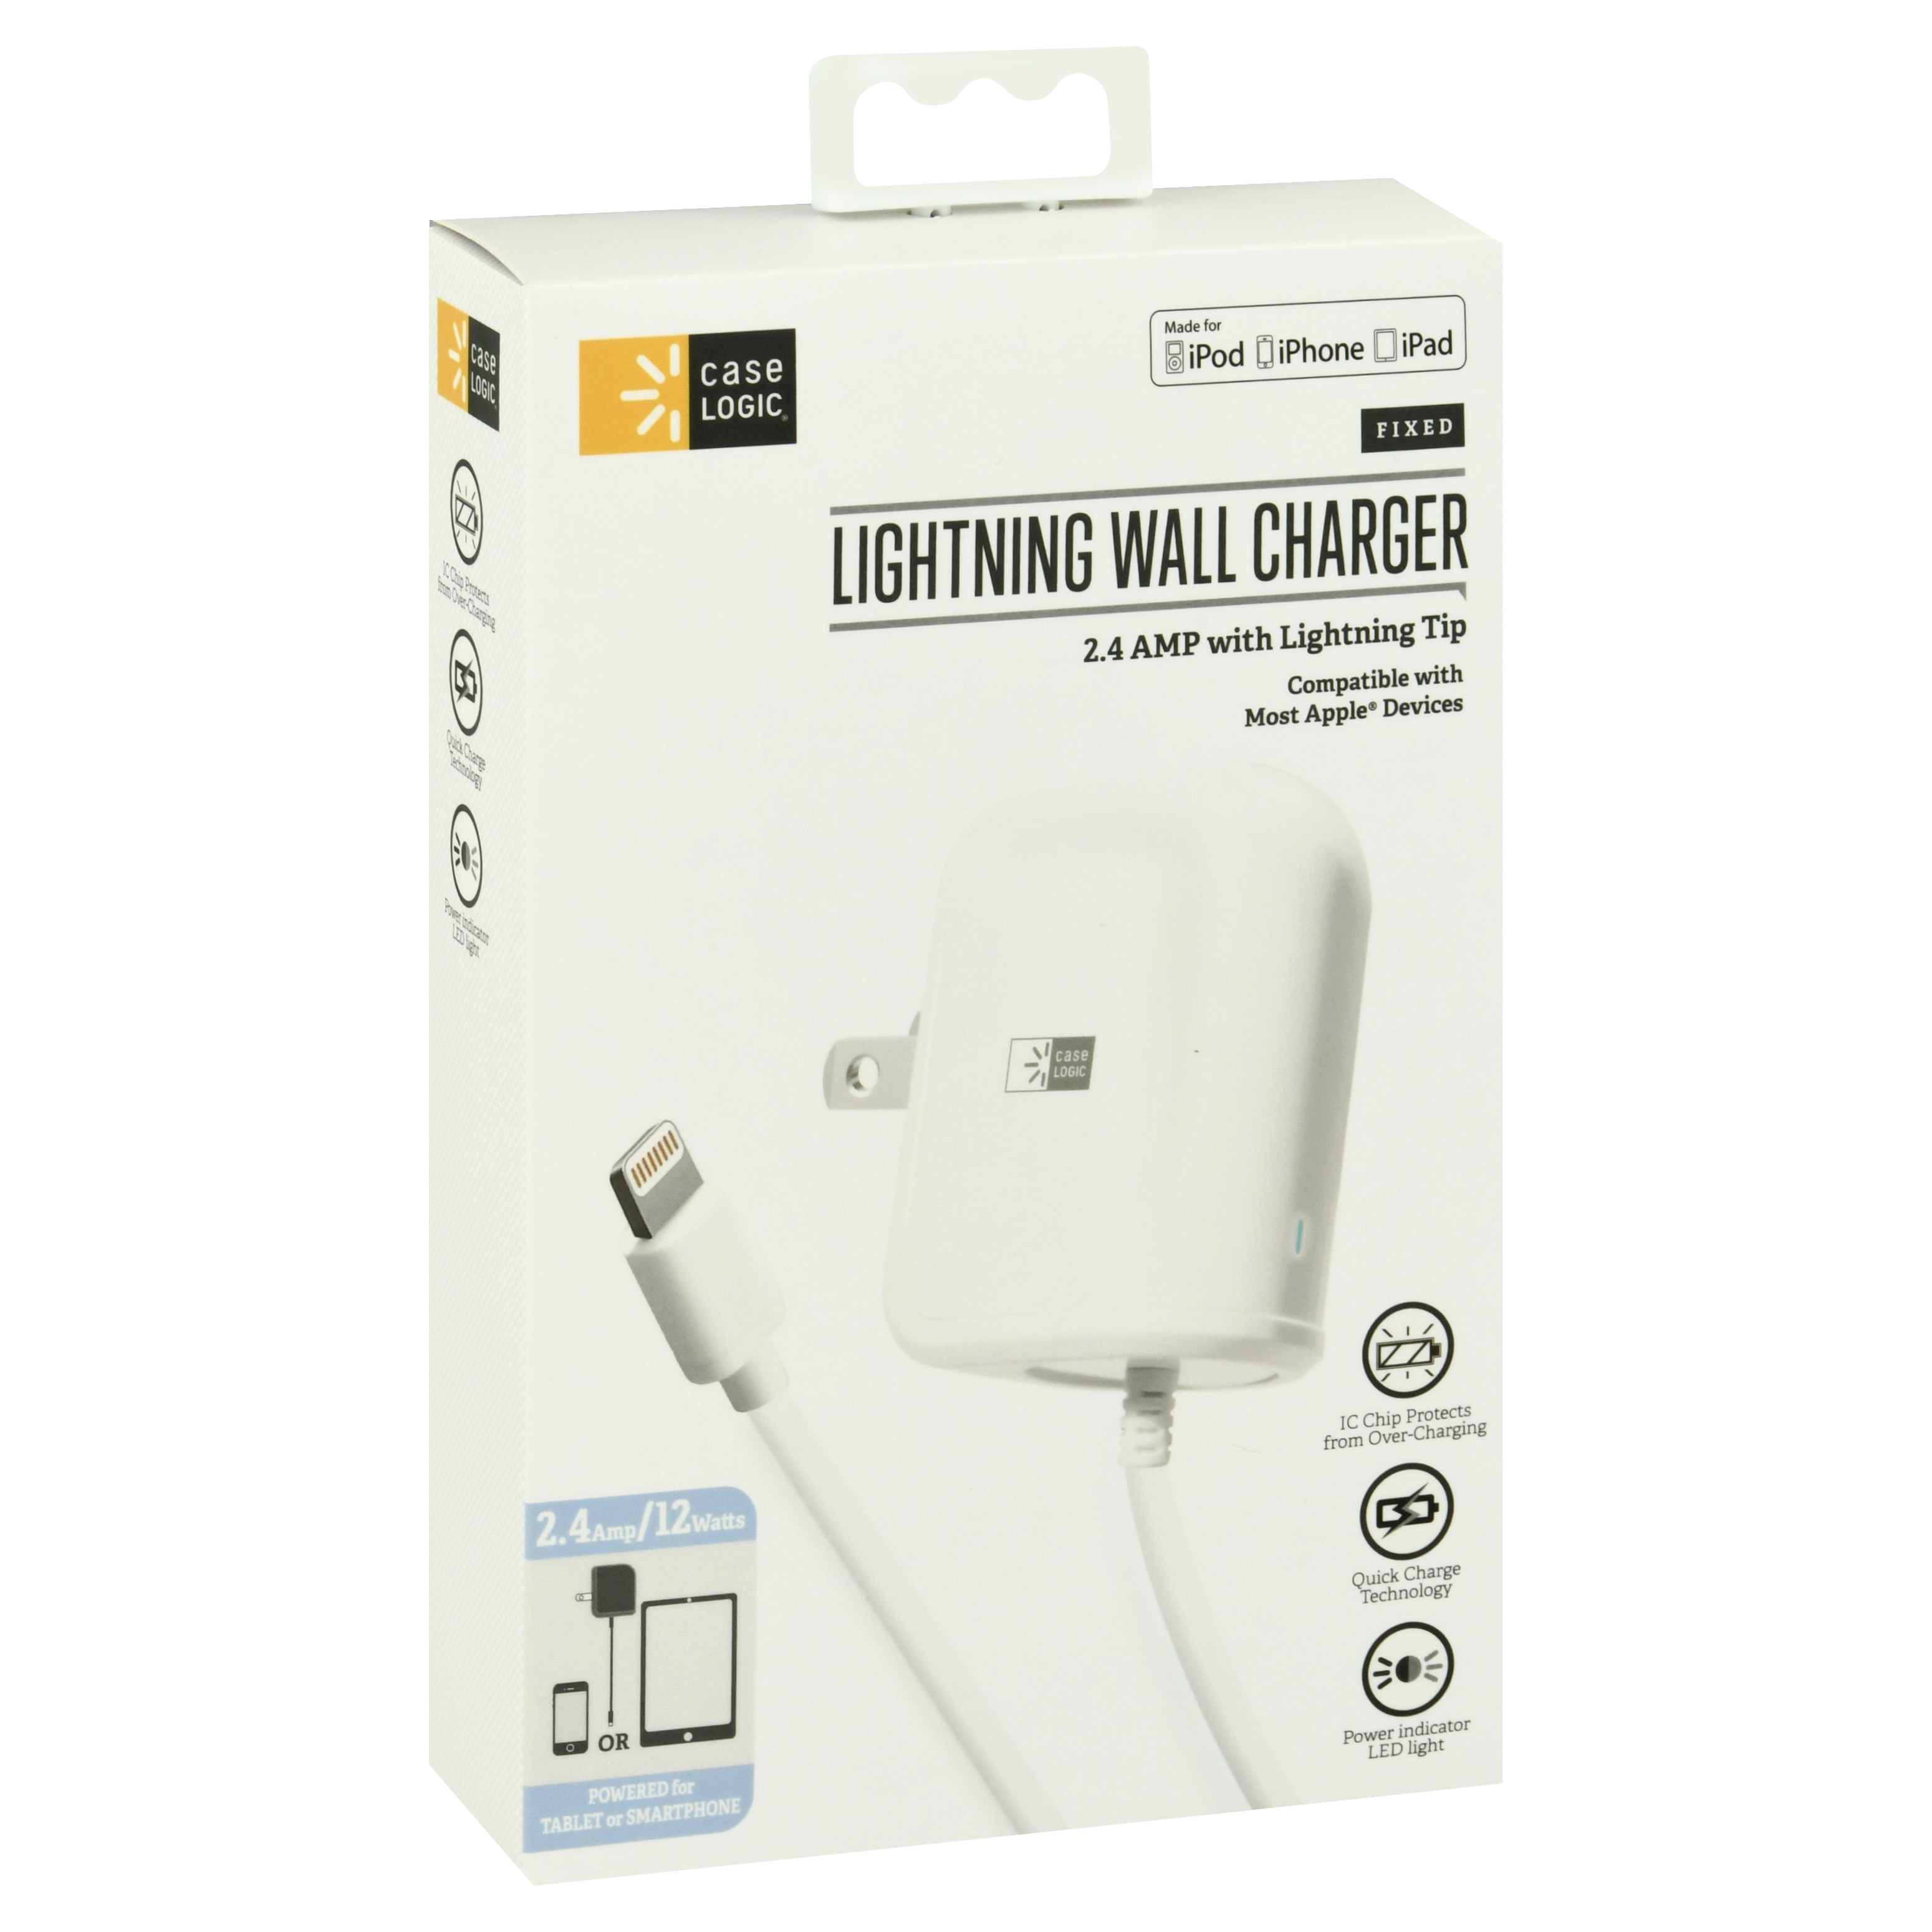 Case Logic Dedicated Lightning Home Charger 2.1 Amp White CLTCMF - image 2 of 2